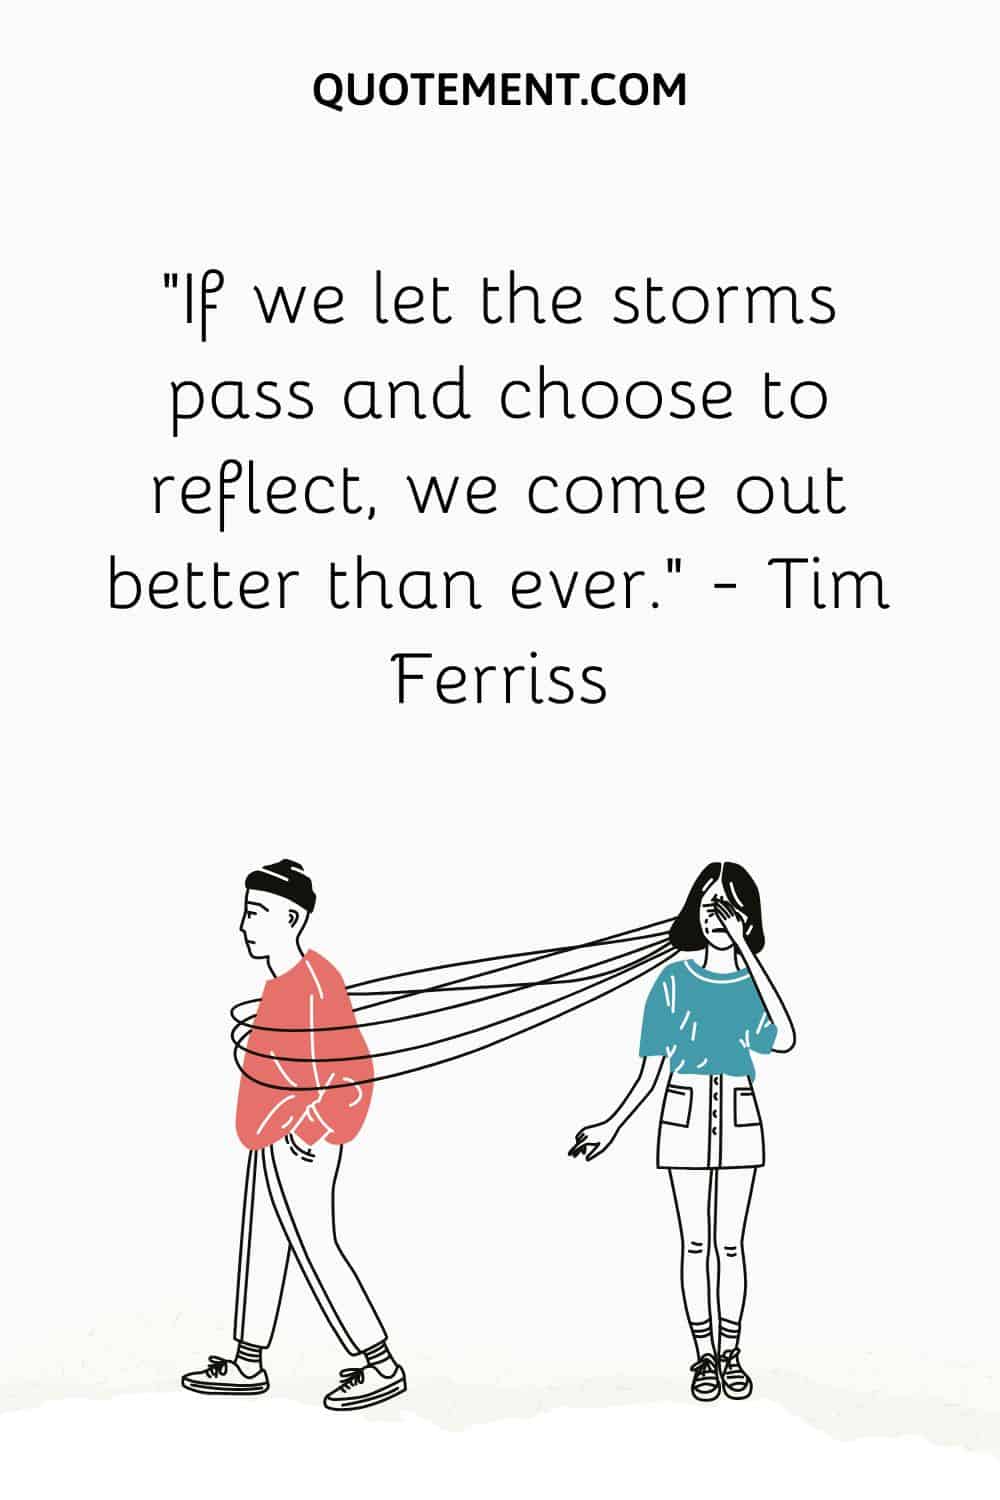 If we let the storms pass and choose to reflect, we come out better than ever